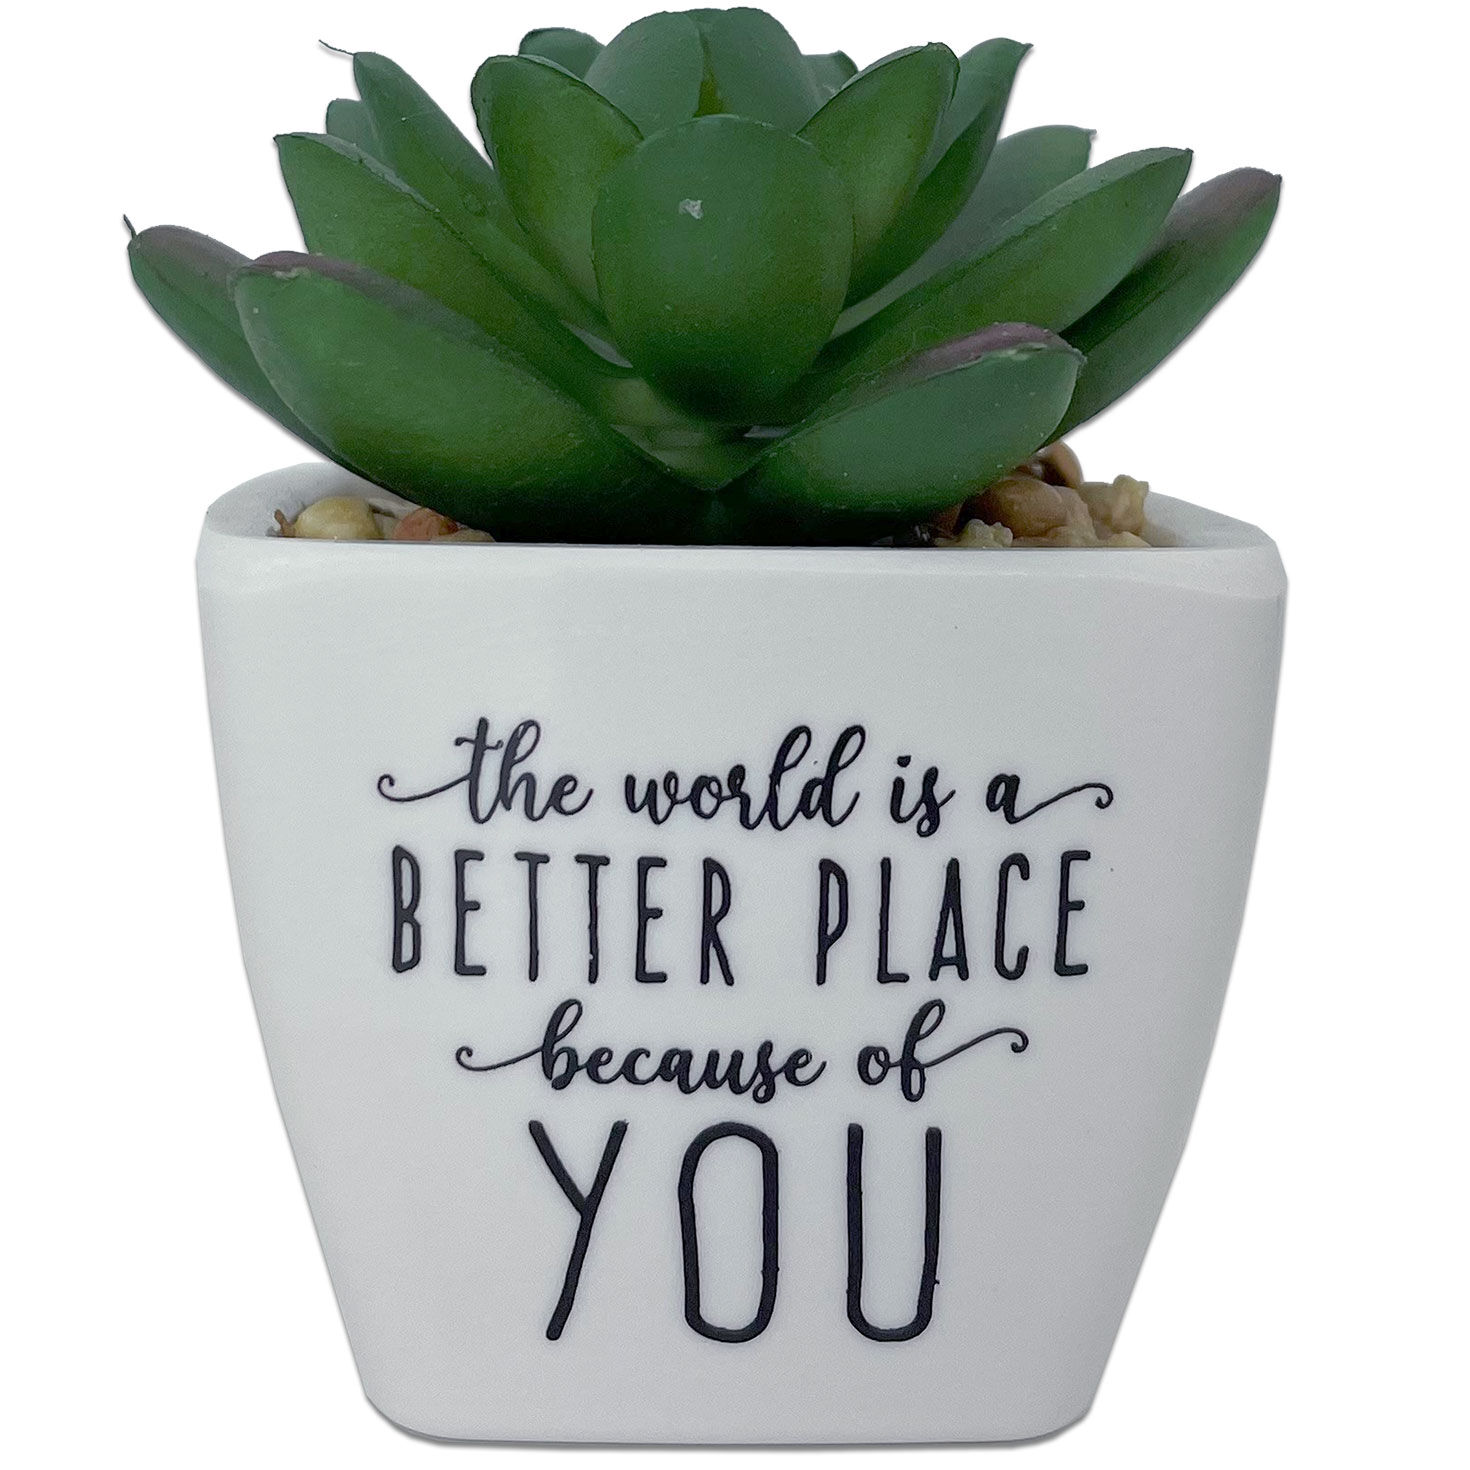 Funny Plant Quotes and Funny Garden Quotes for Letter Boards | Plants  quotes, Garden quotes, Hanging plants